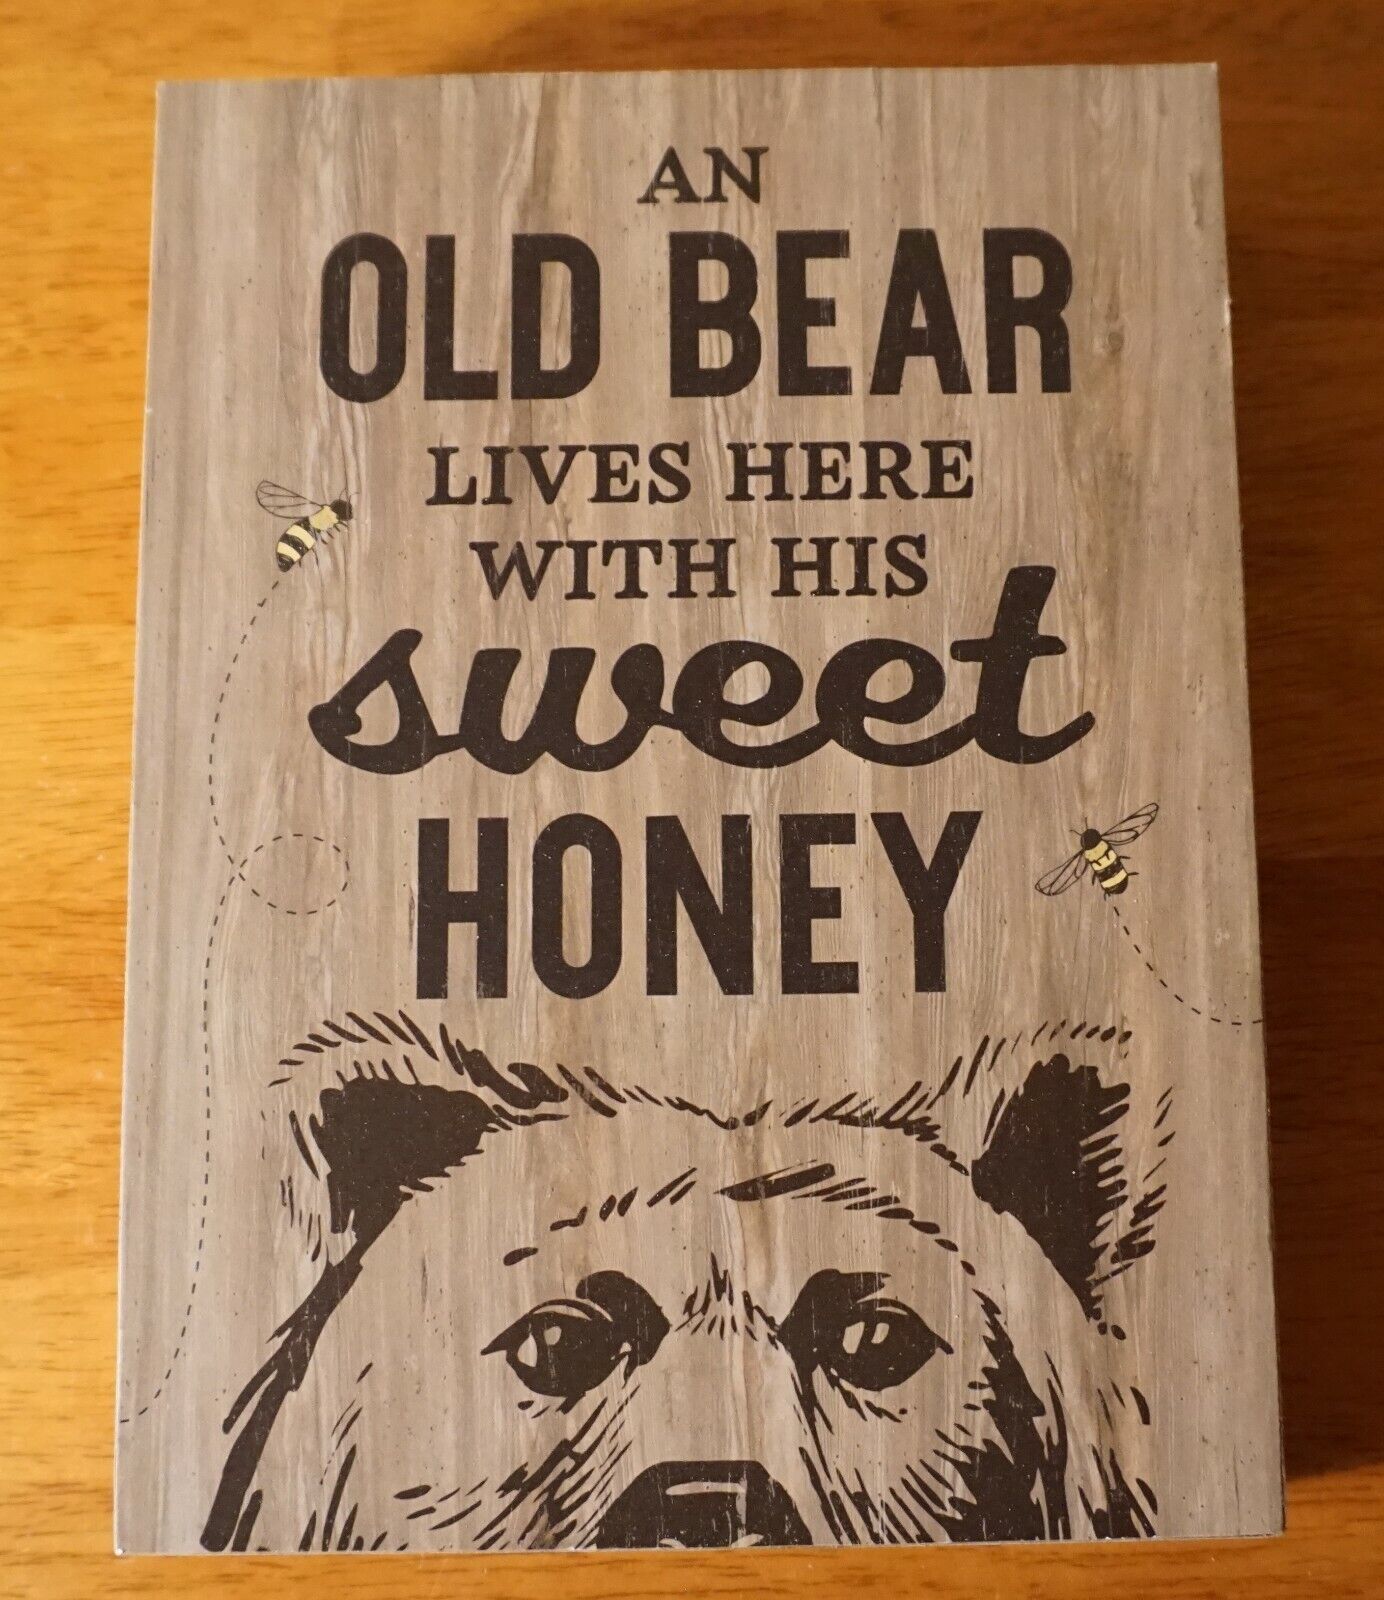 OLD BEAR LIVES HERE WITH HIS SWEET HONEY Bees Primitive Lodge Cabin Home Decor